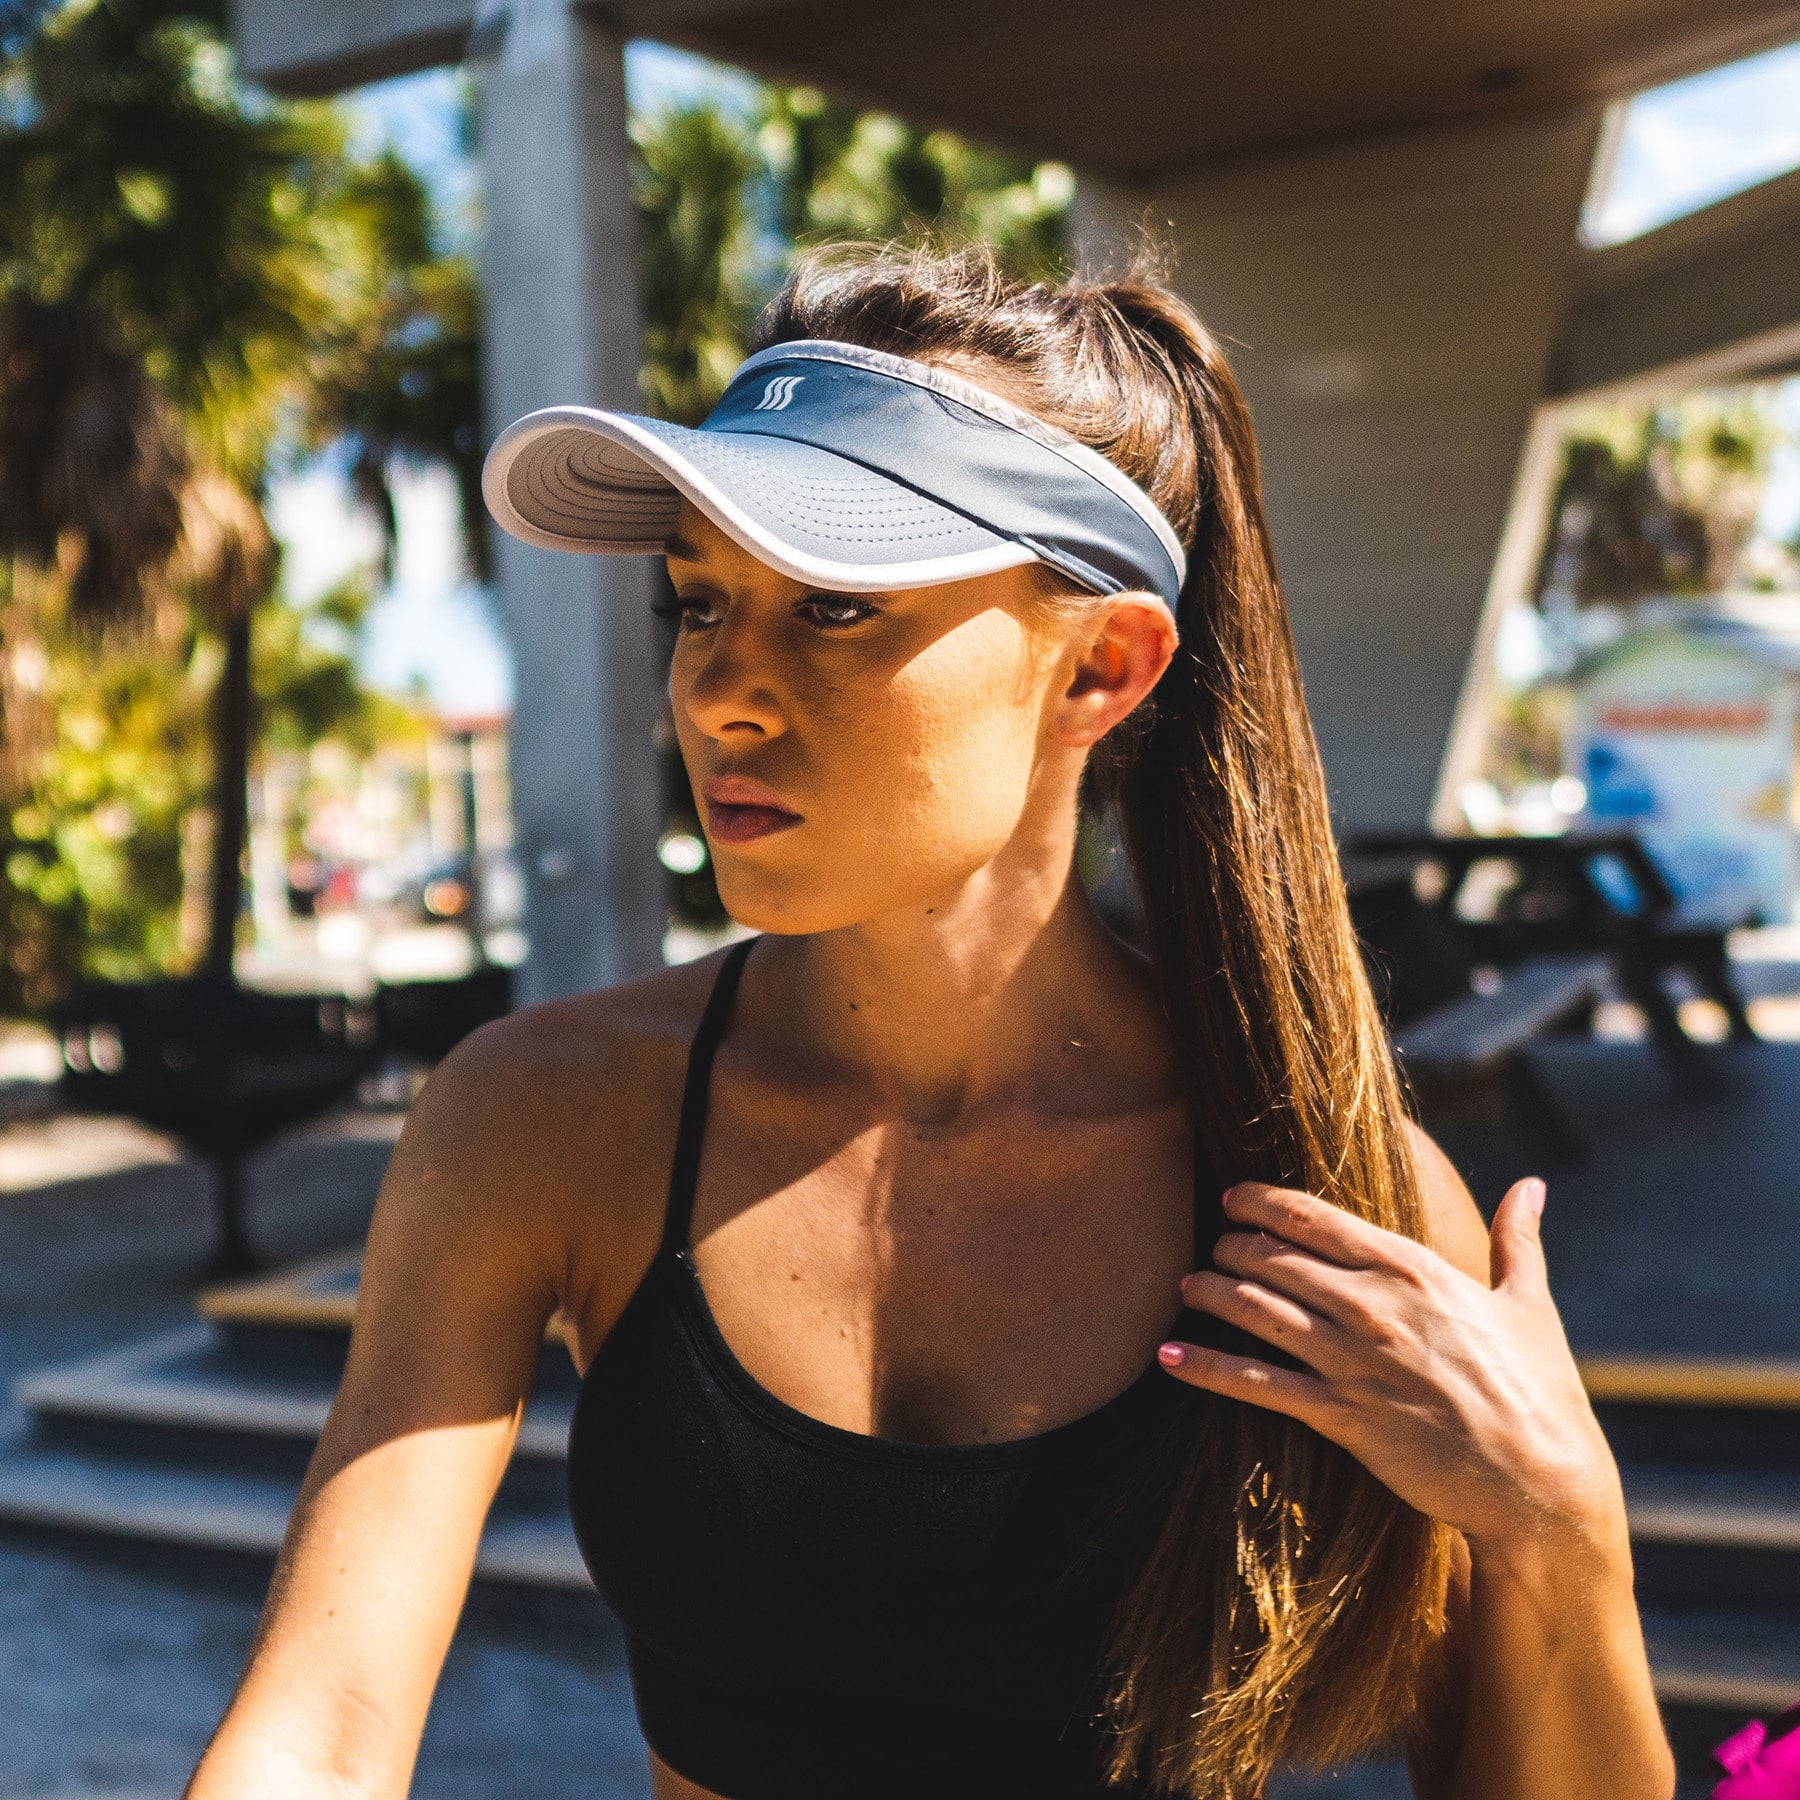 Women runner wearing a gray visor to help with the sun.